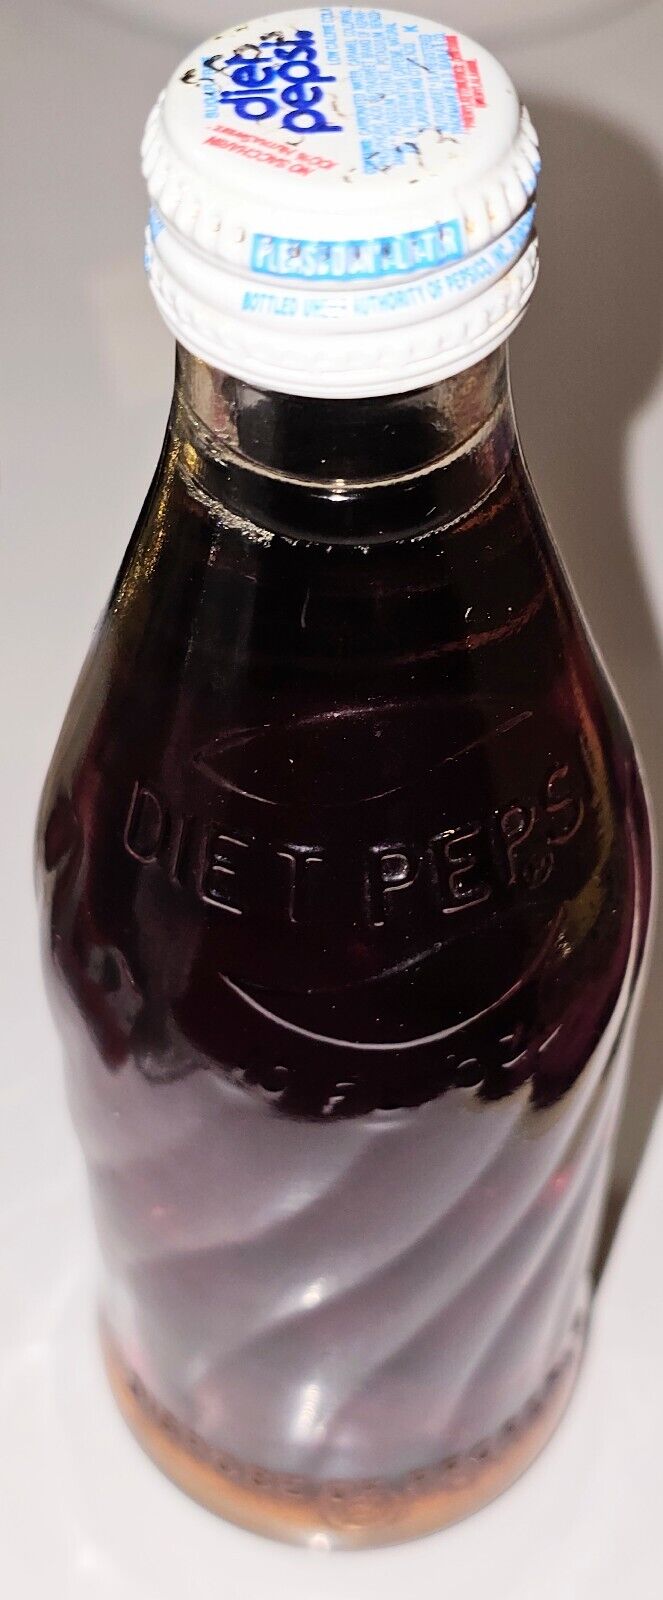 Old Diet Pepsi bottle Full And Flawless Rare